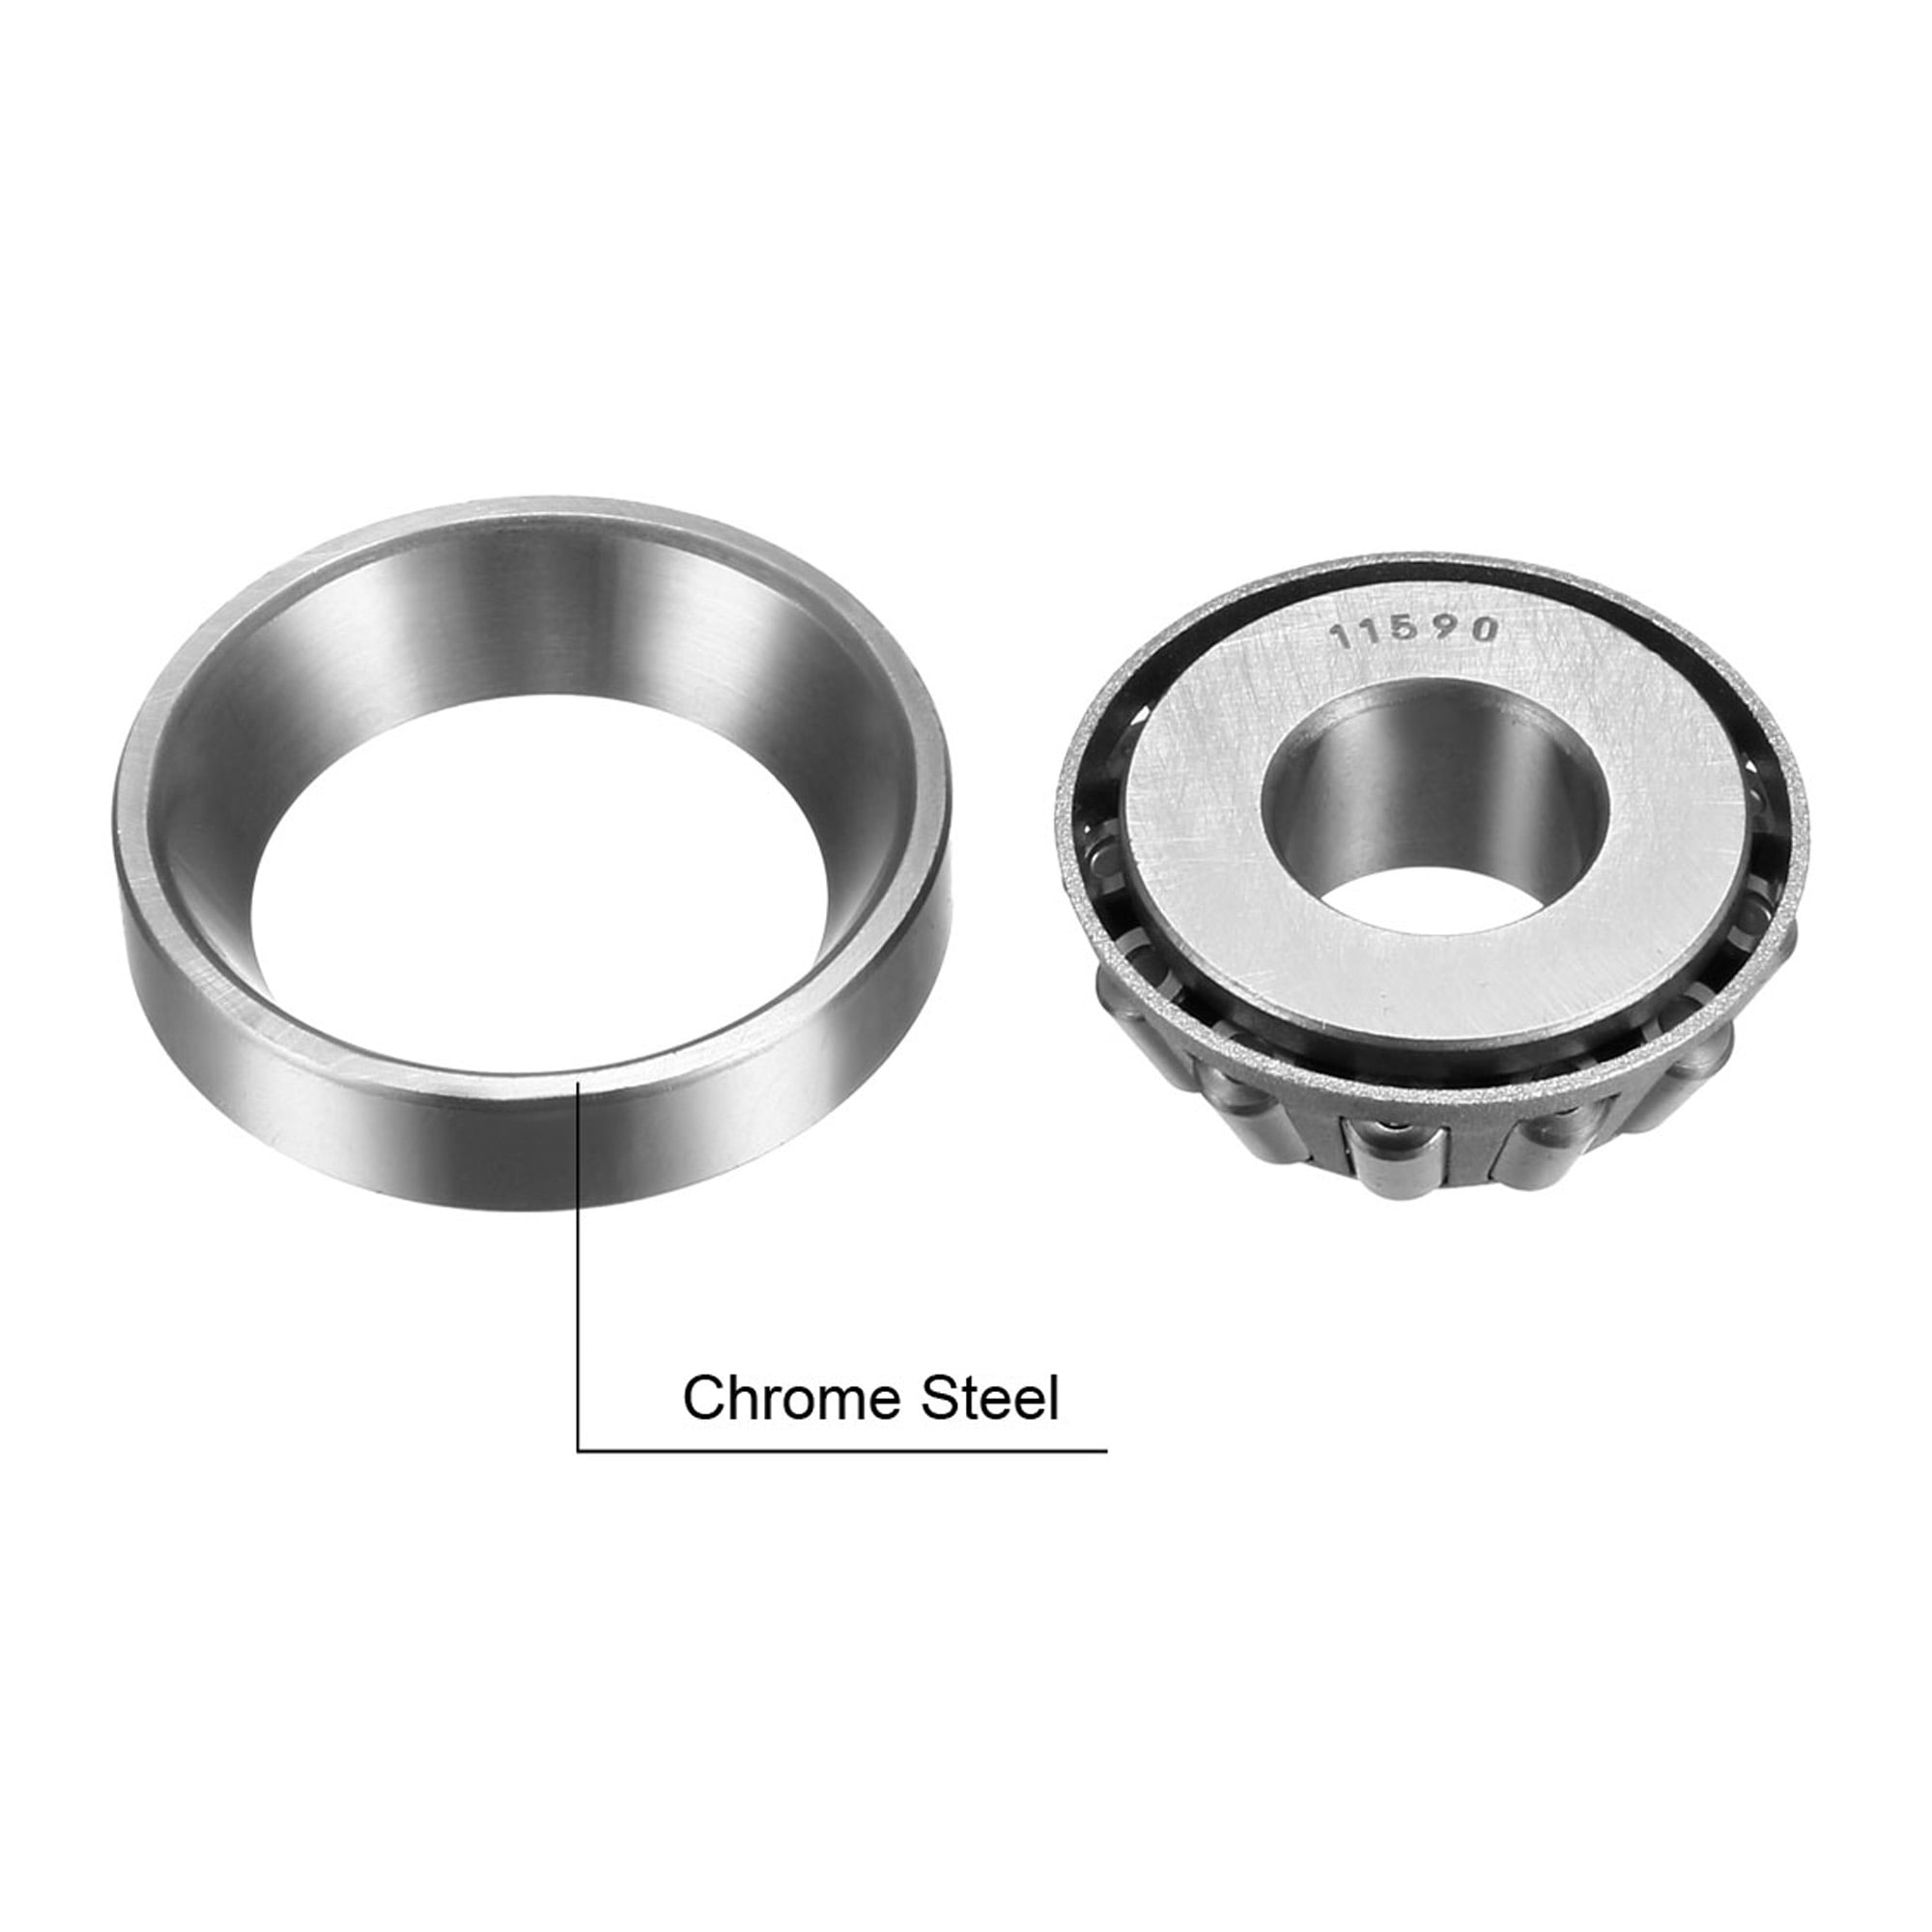 11590/11520 Premier Budget inch Taper Roller Bearing Cup/Cone Set 